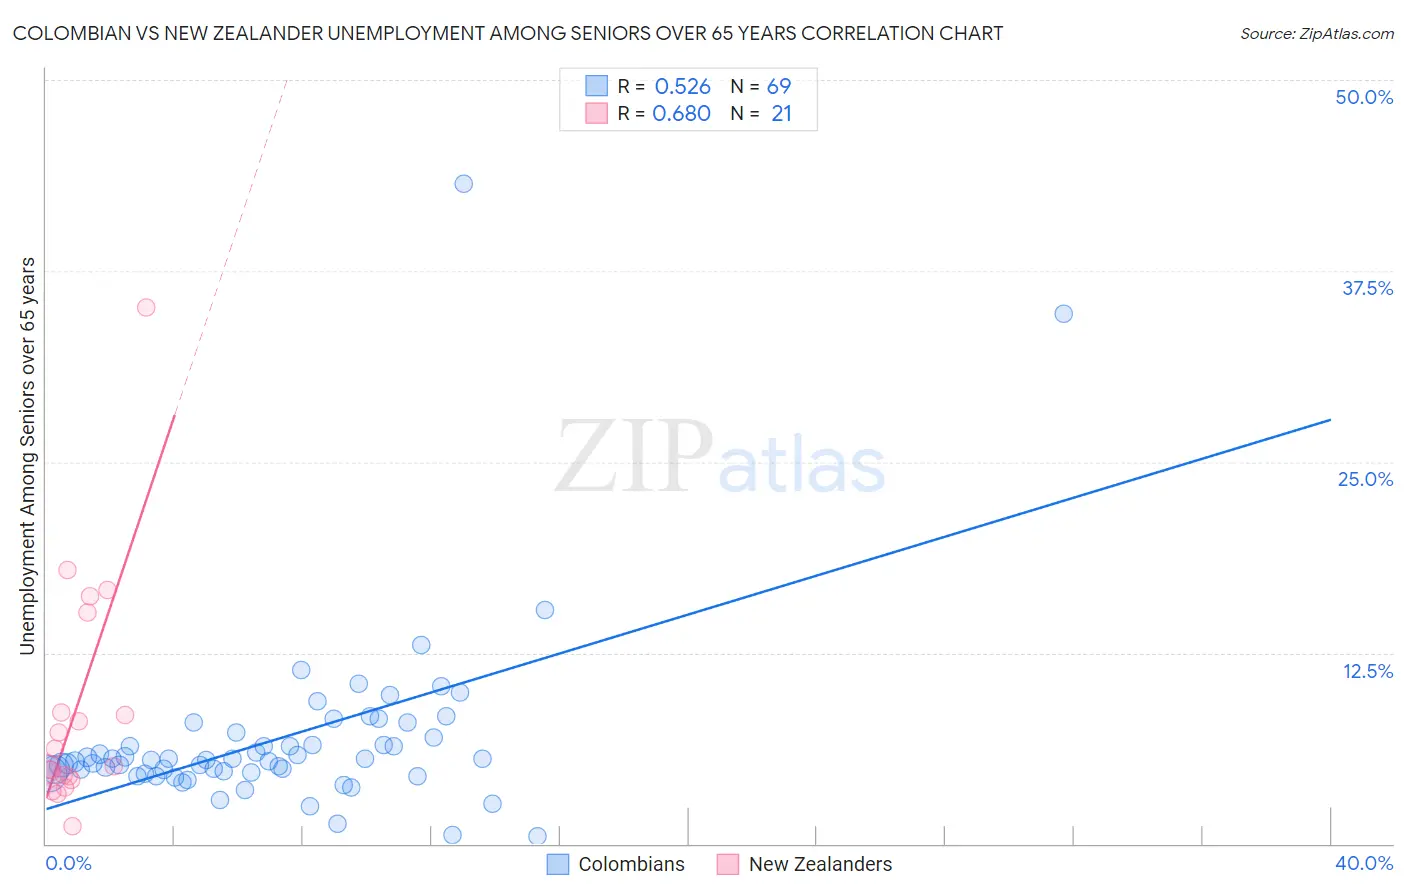 Colombian vs New Zealander Unemployment Among Seniors over 65 years